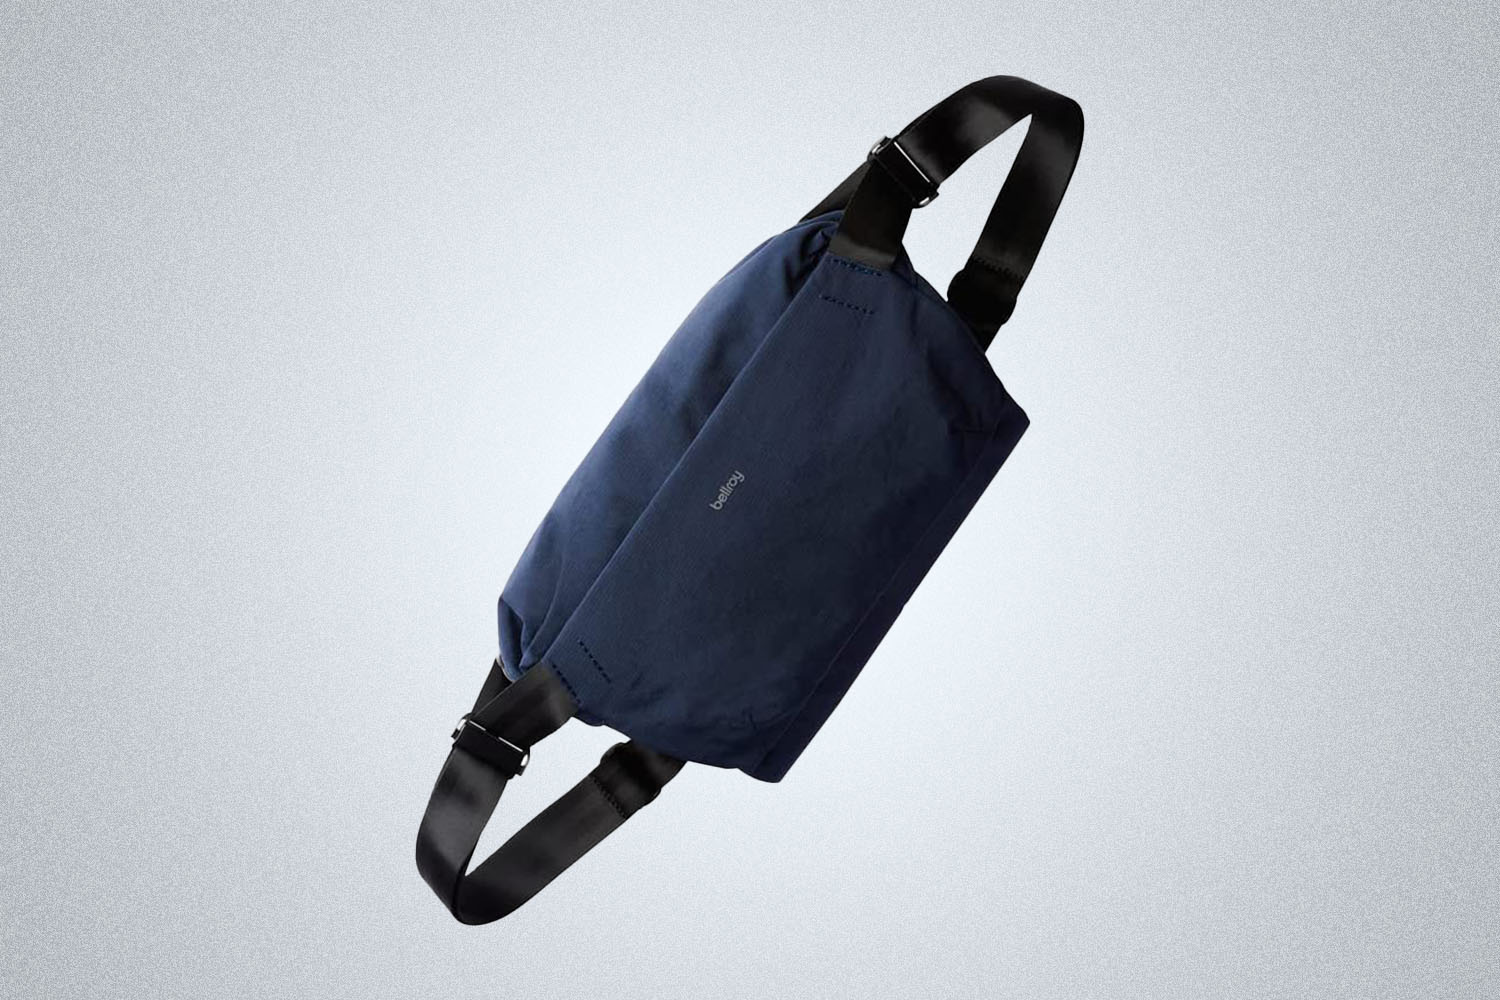 A Bellroy Sling bag on a gray background